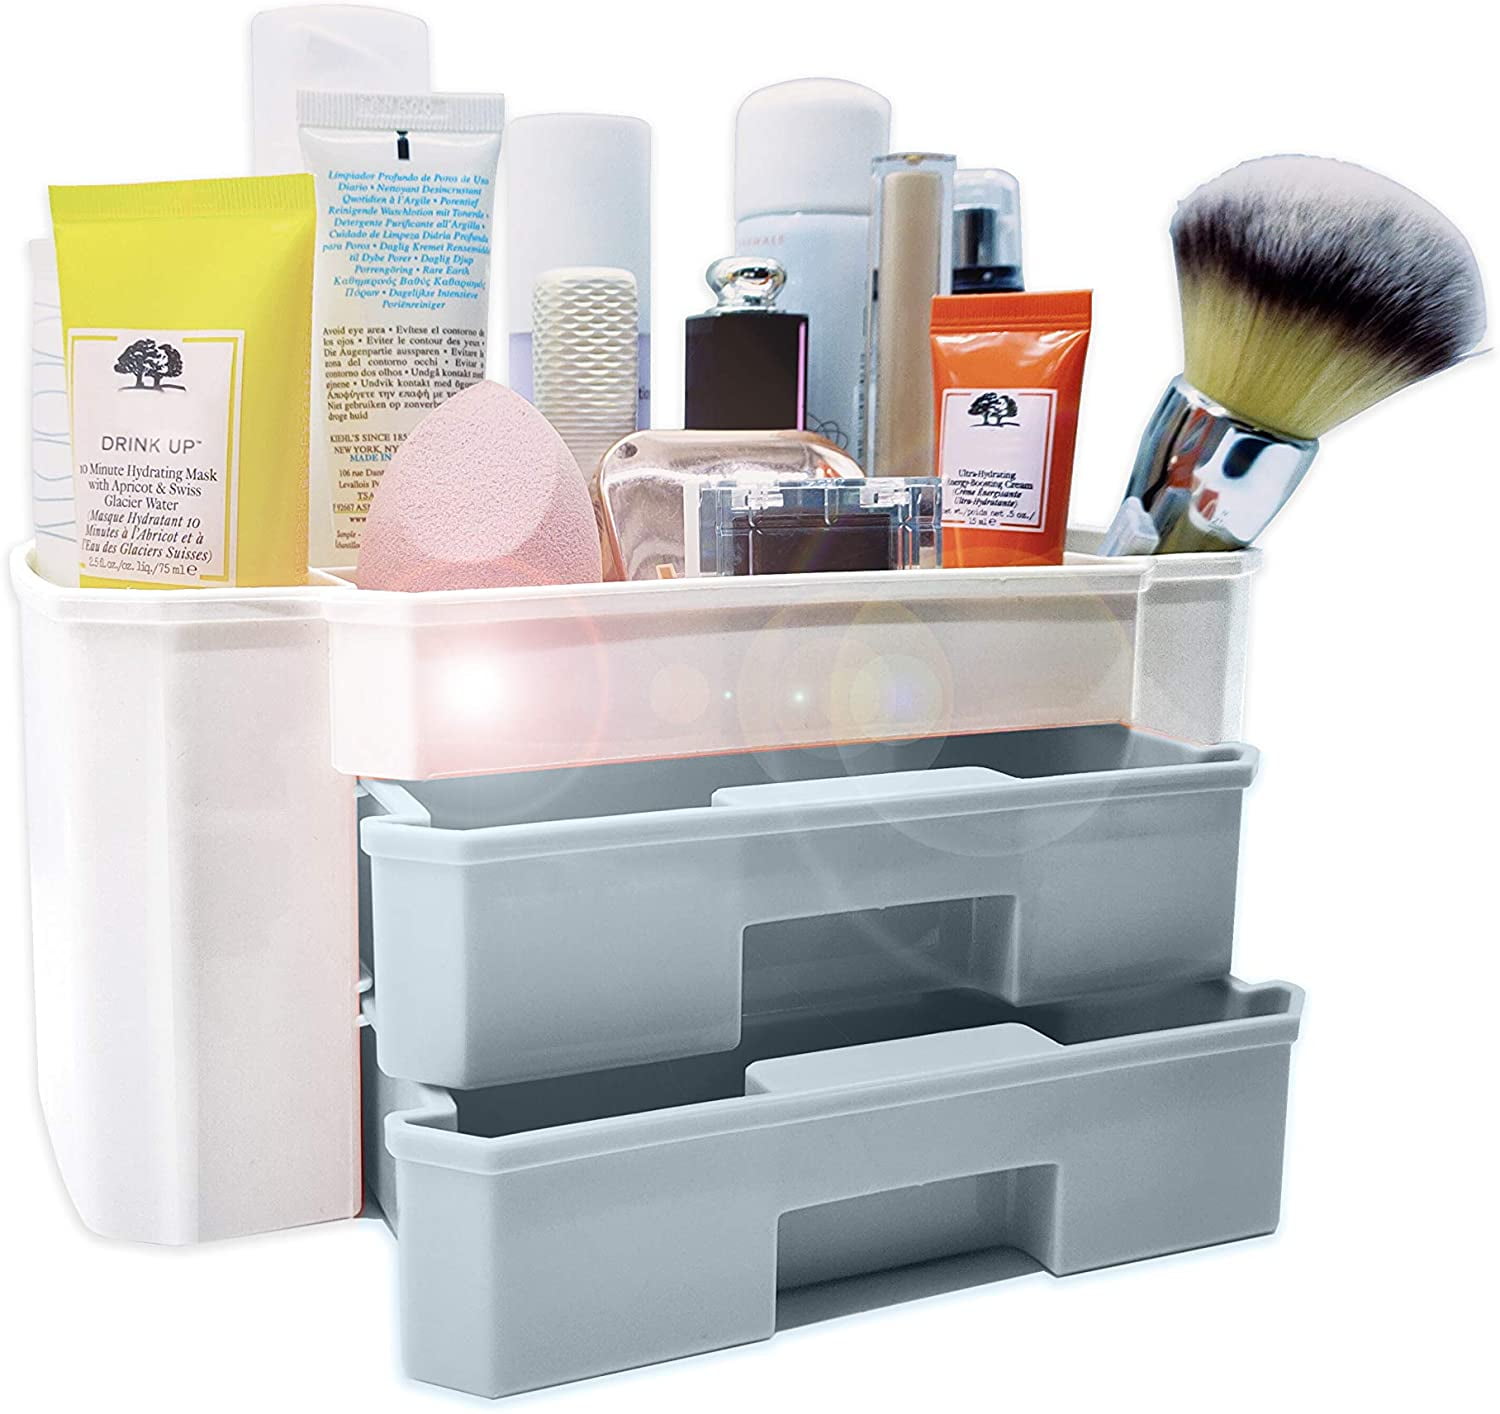 CHANCETSUI Makeup Organizer with Drawers, Countertop Organizer for Vanity, Bathroom and Bedroom Desk Cosmetics Display Case for Brushes, Lotions, Perfumes